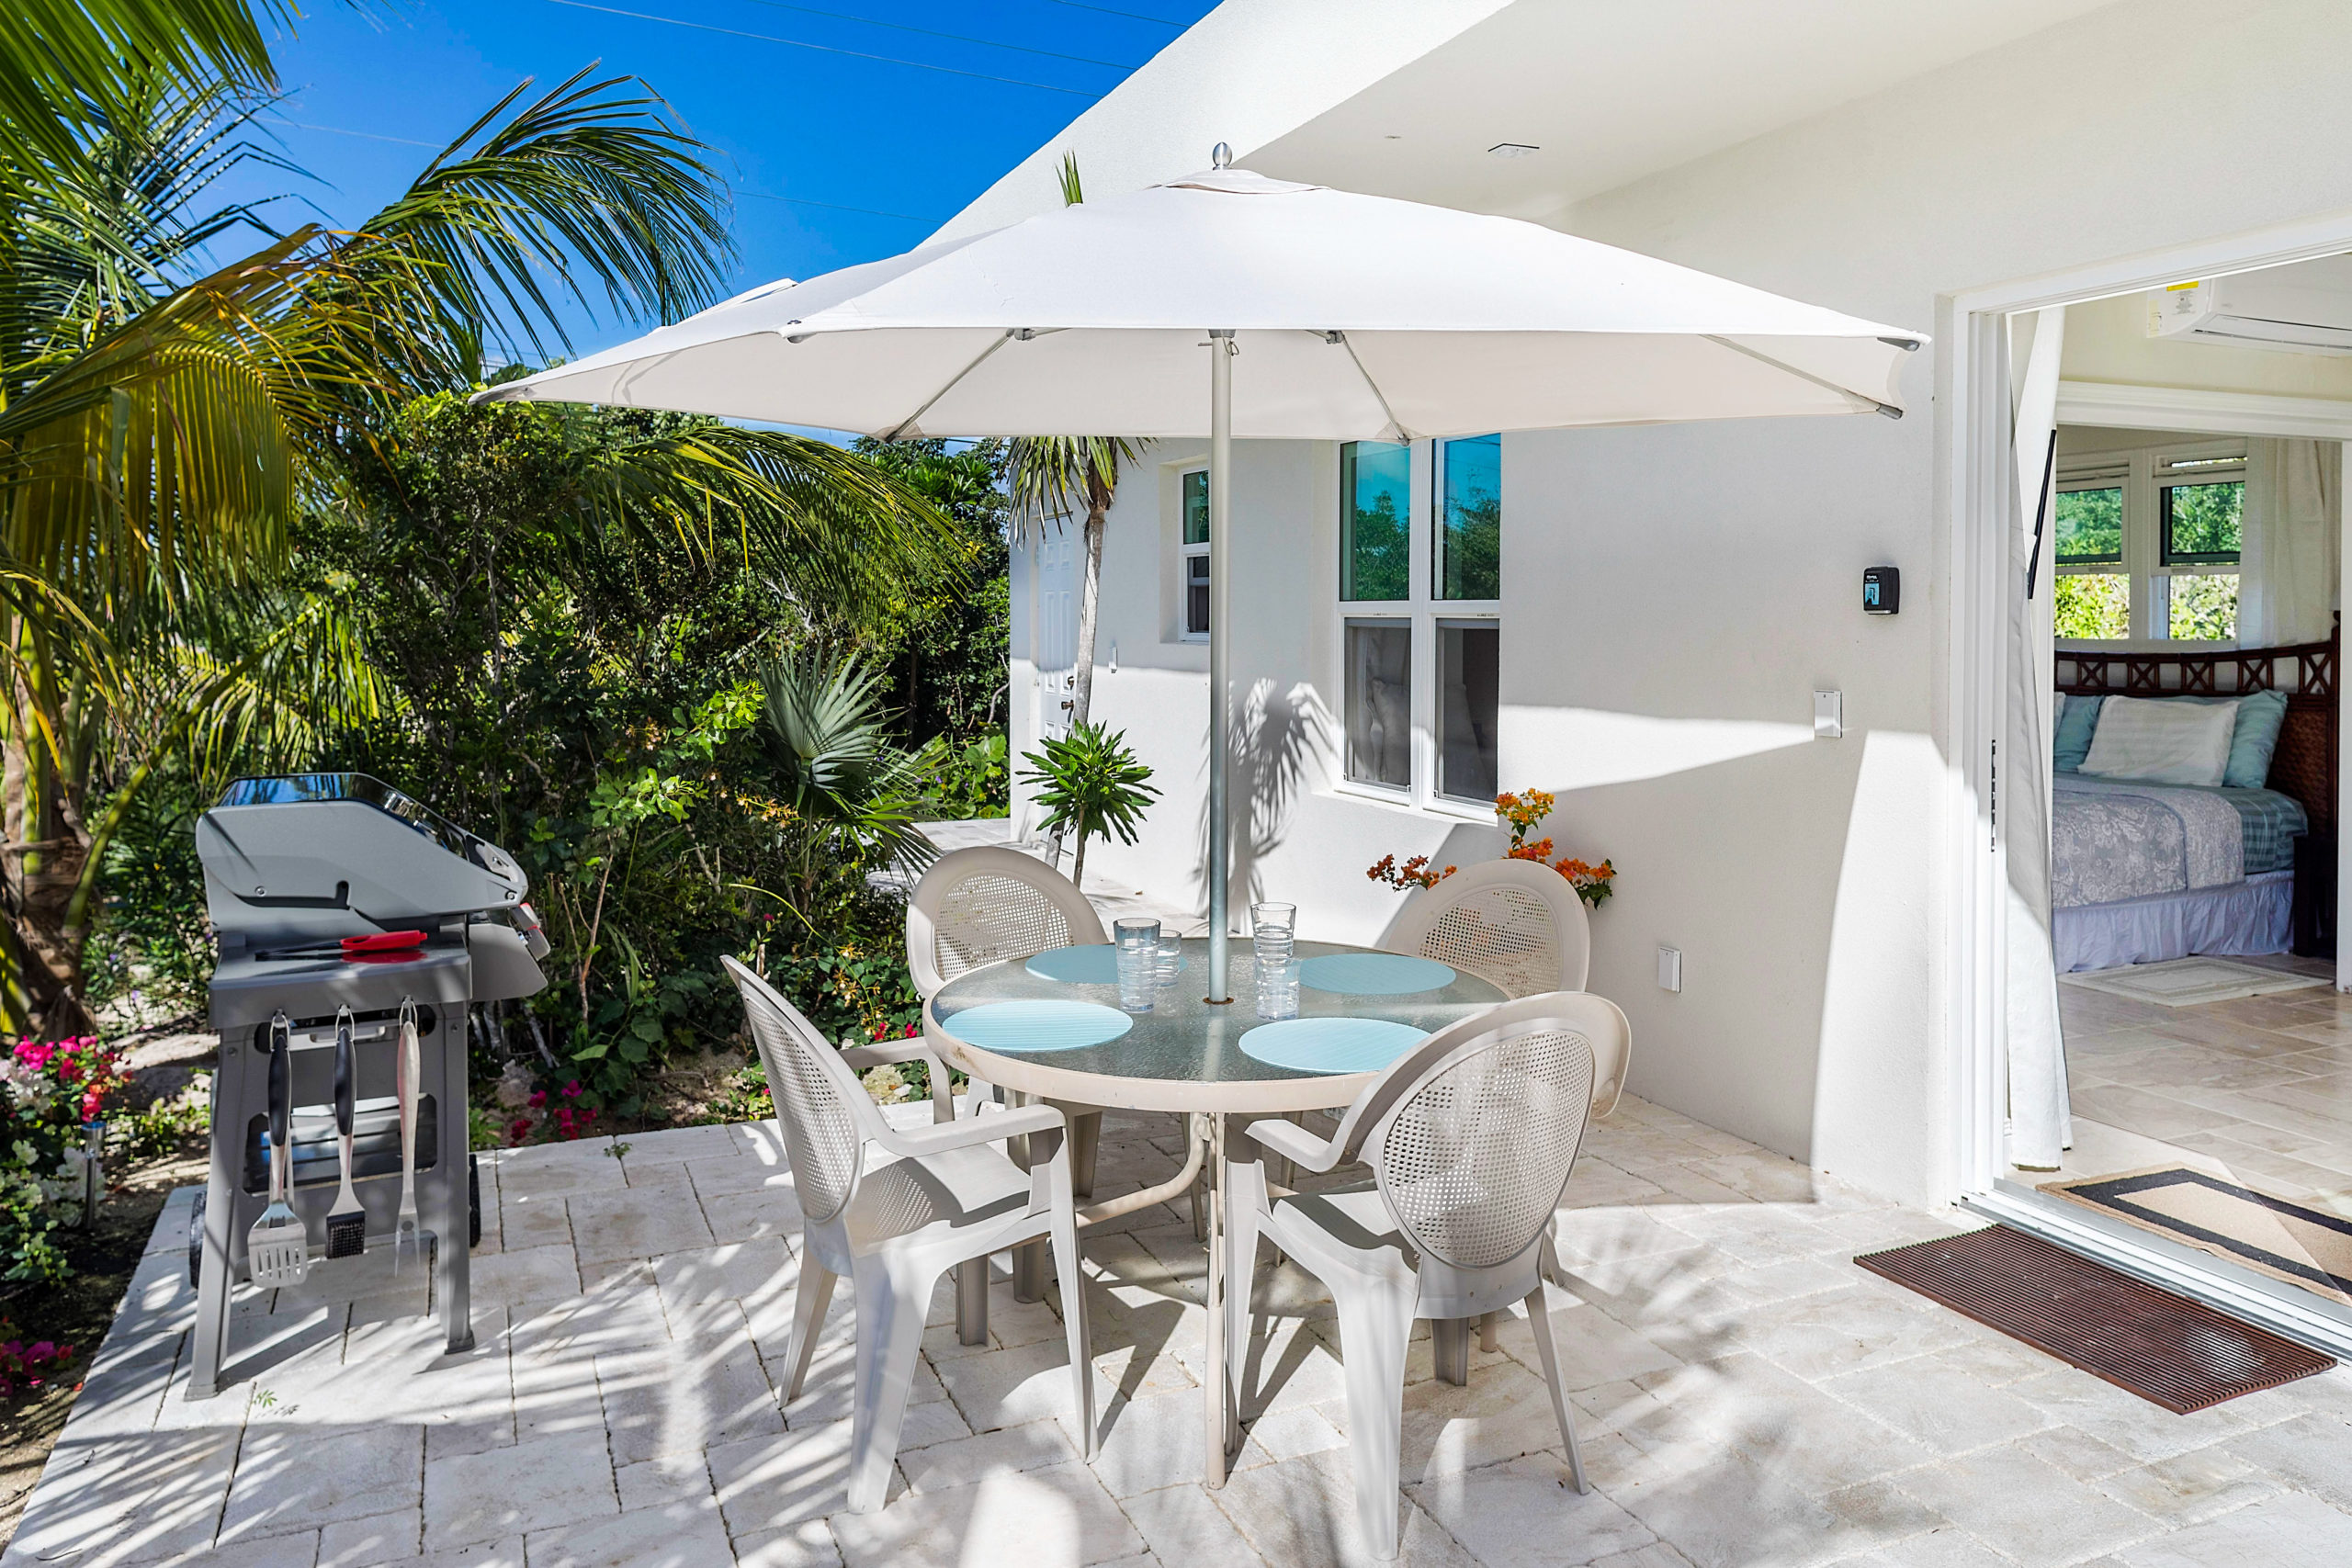 Chuchubi Cottage - Turks and Caicos Vacation Rentals